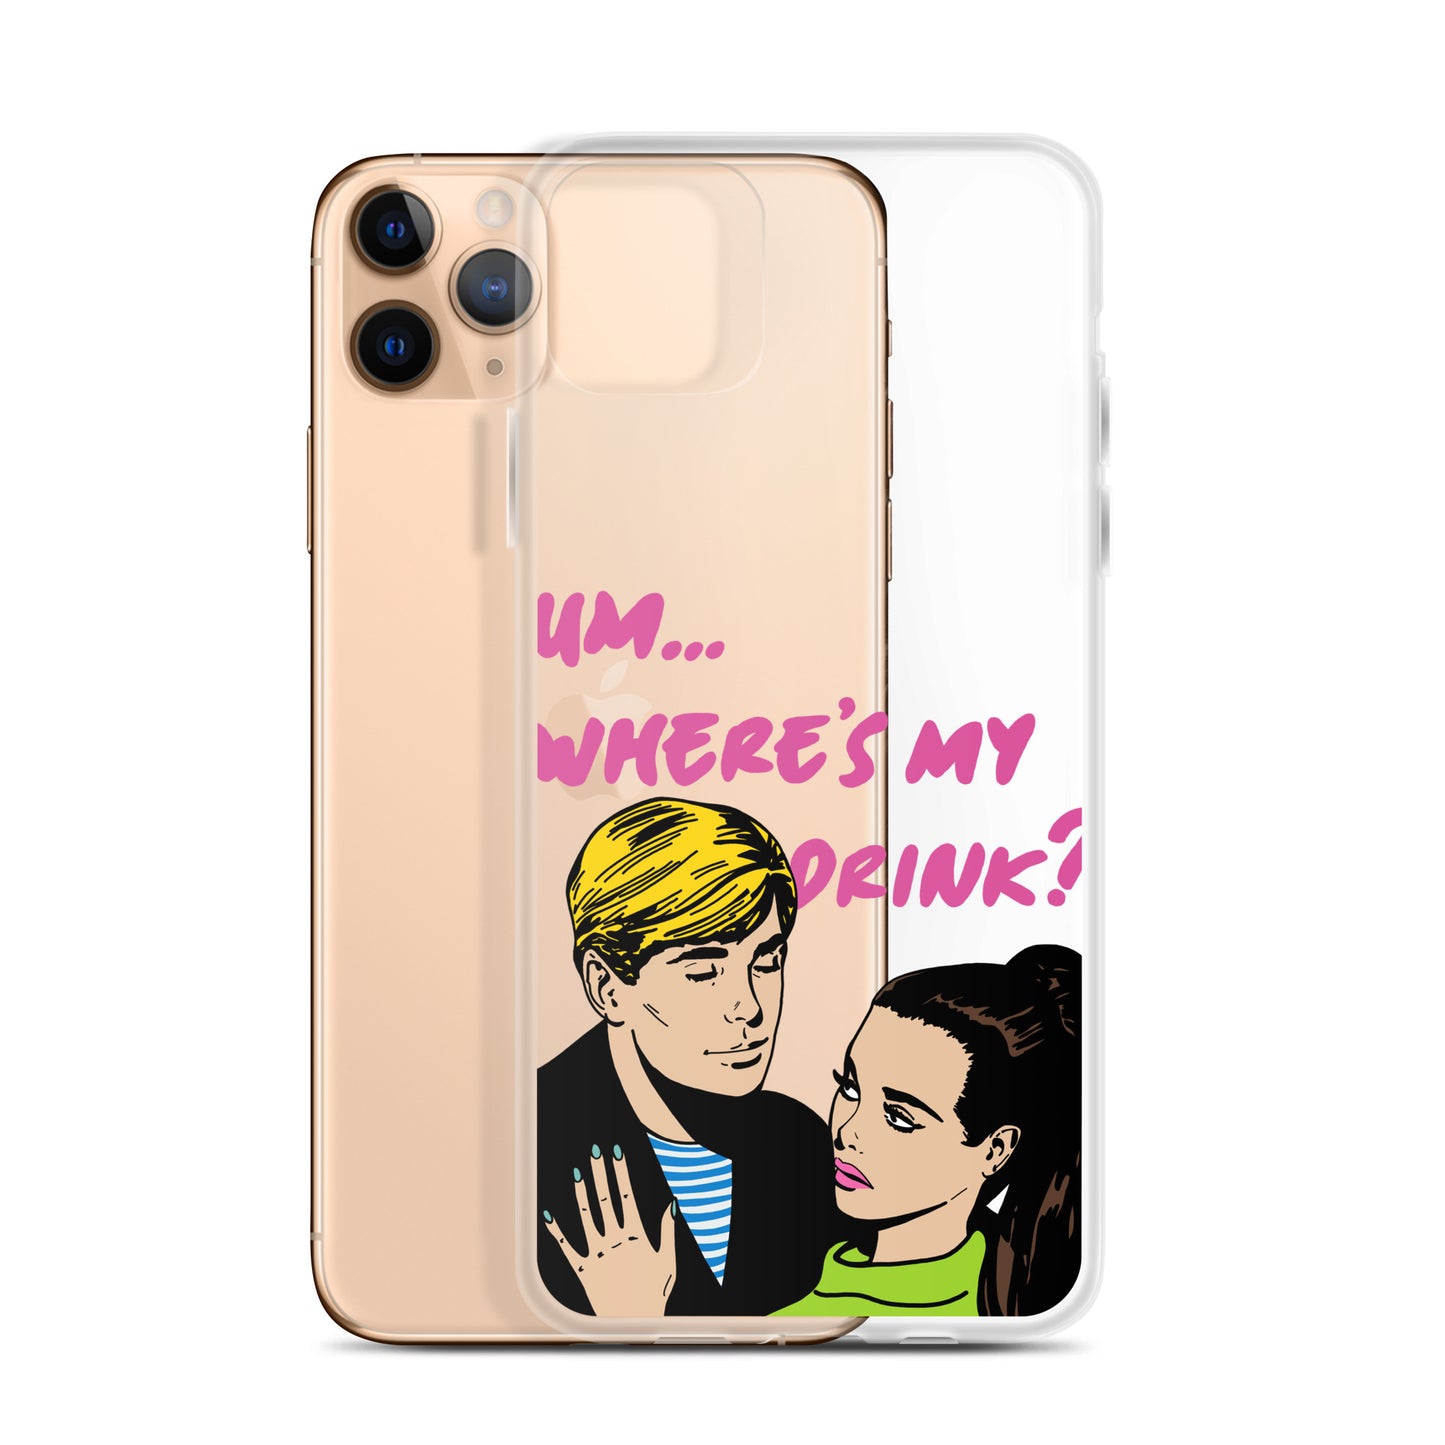 "Drink Please!" iPhone Case